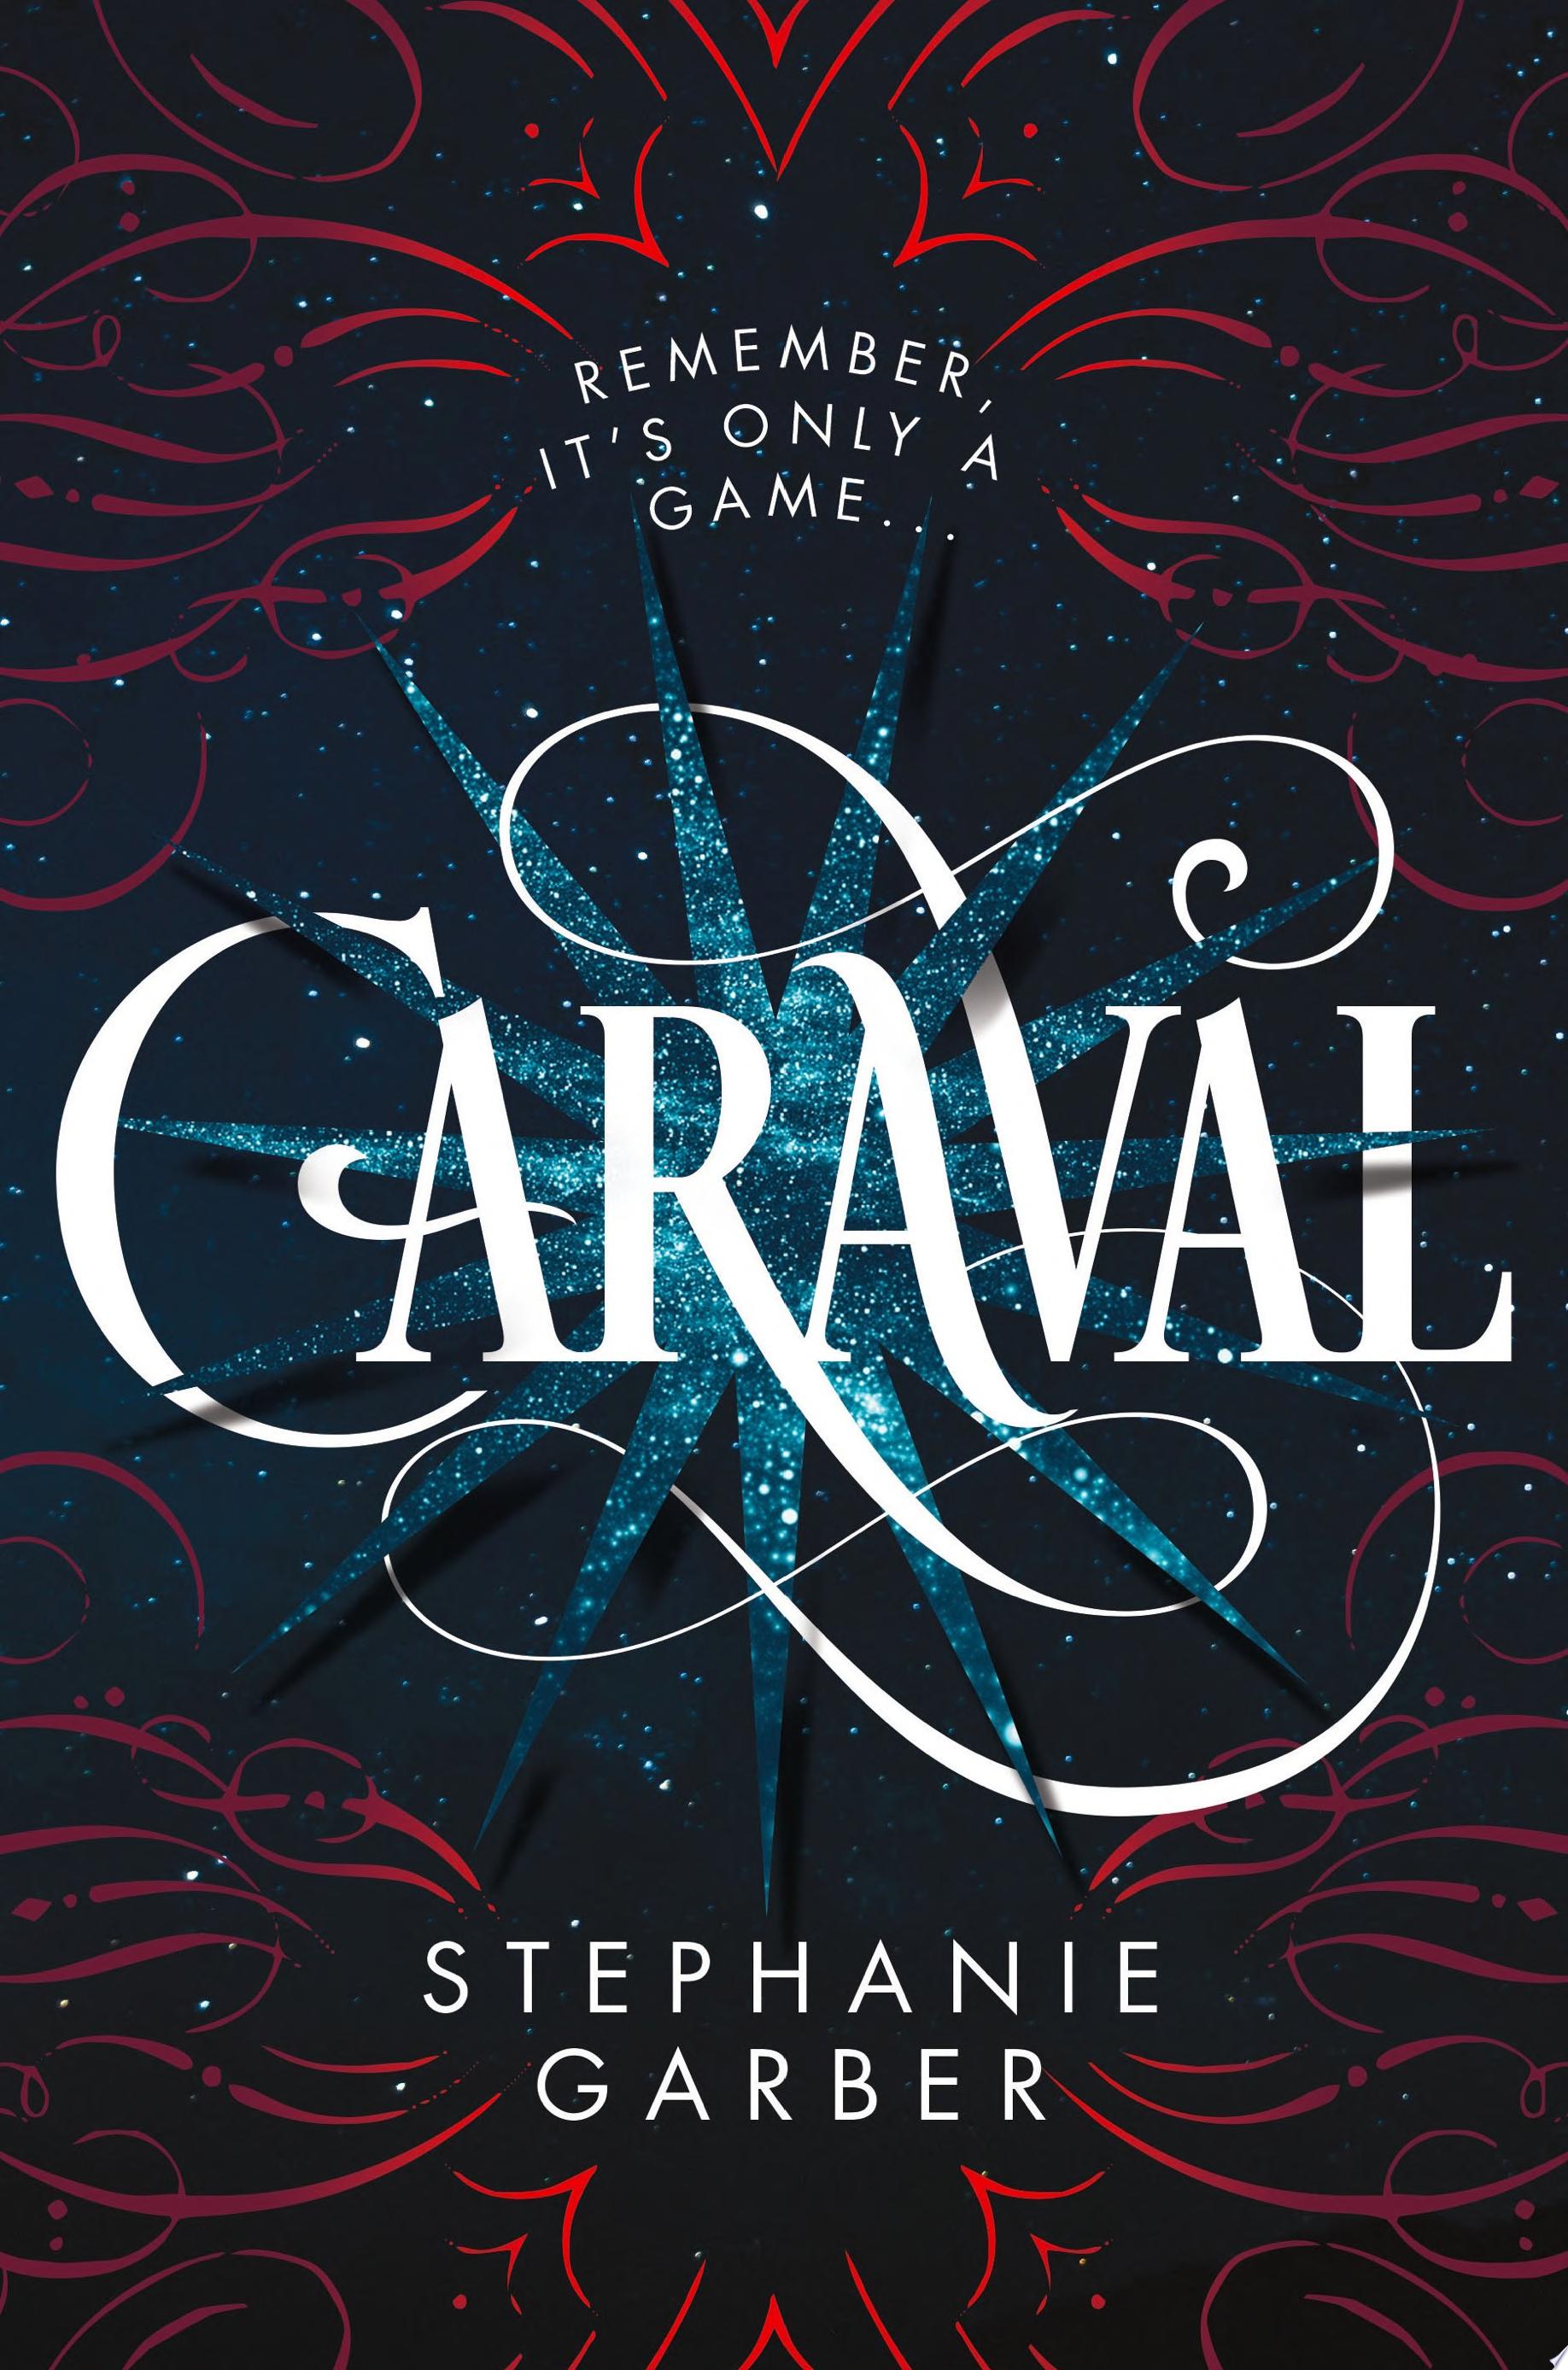 Image for "Caraval"